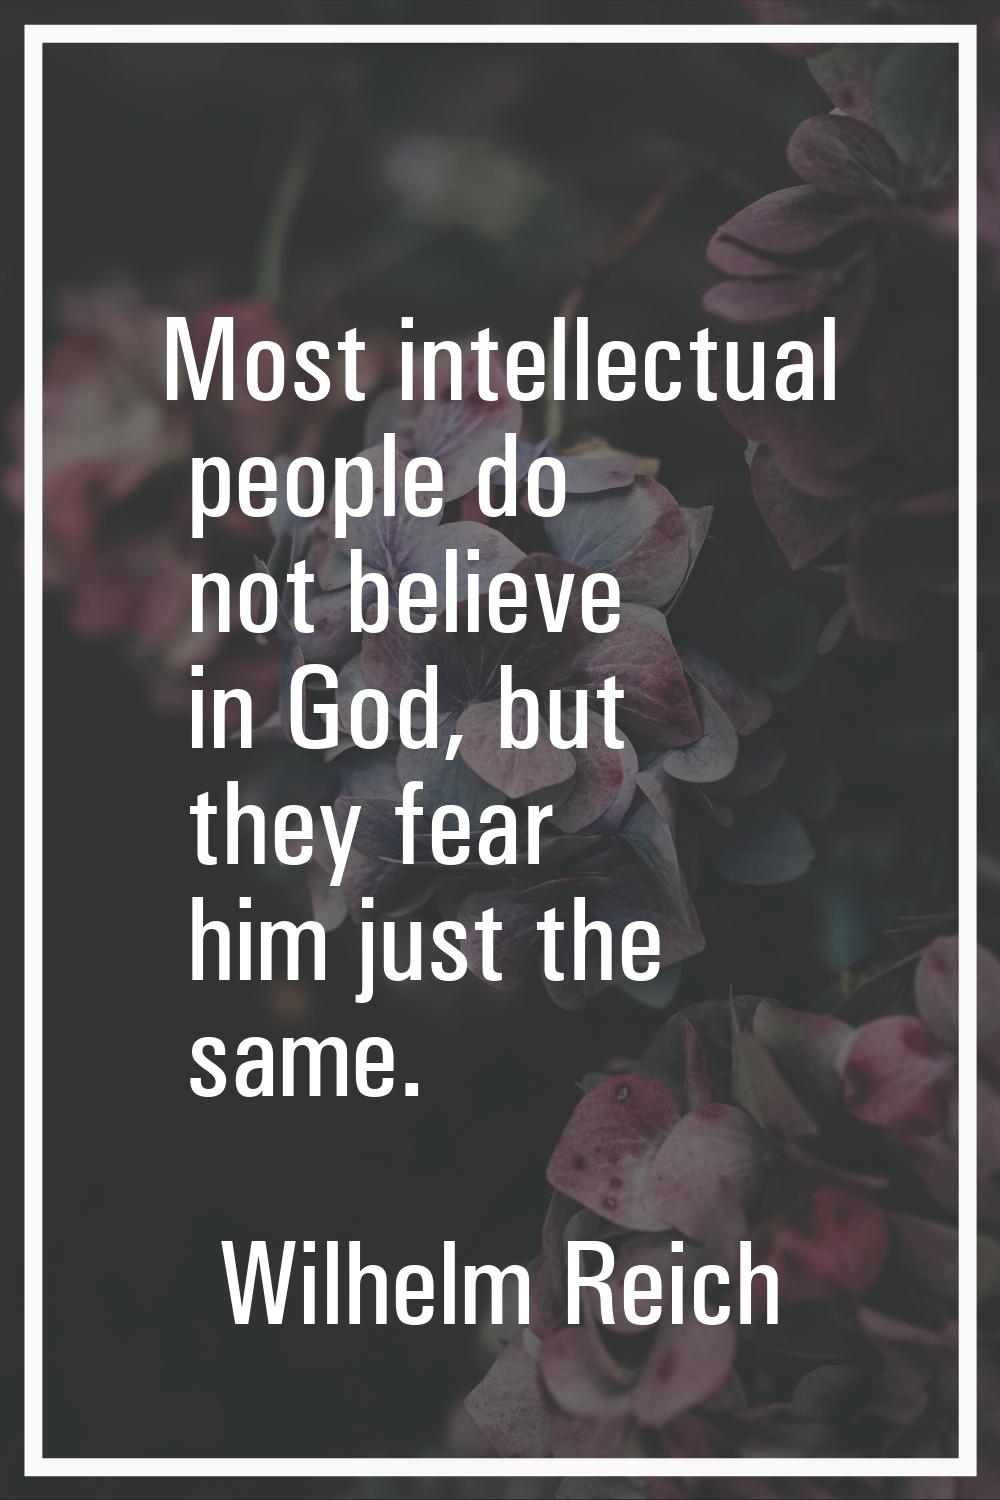 Most intellectual people do not believe in God, but they fear him just the same.